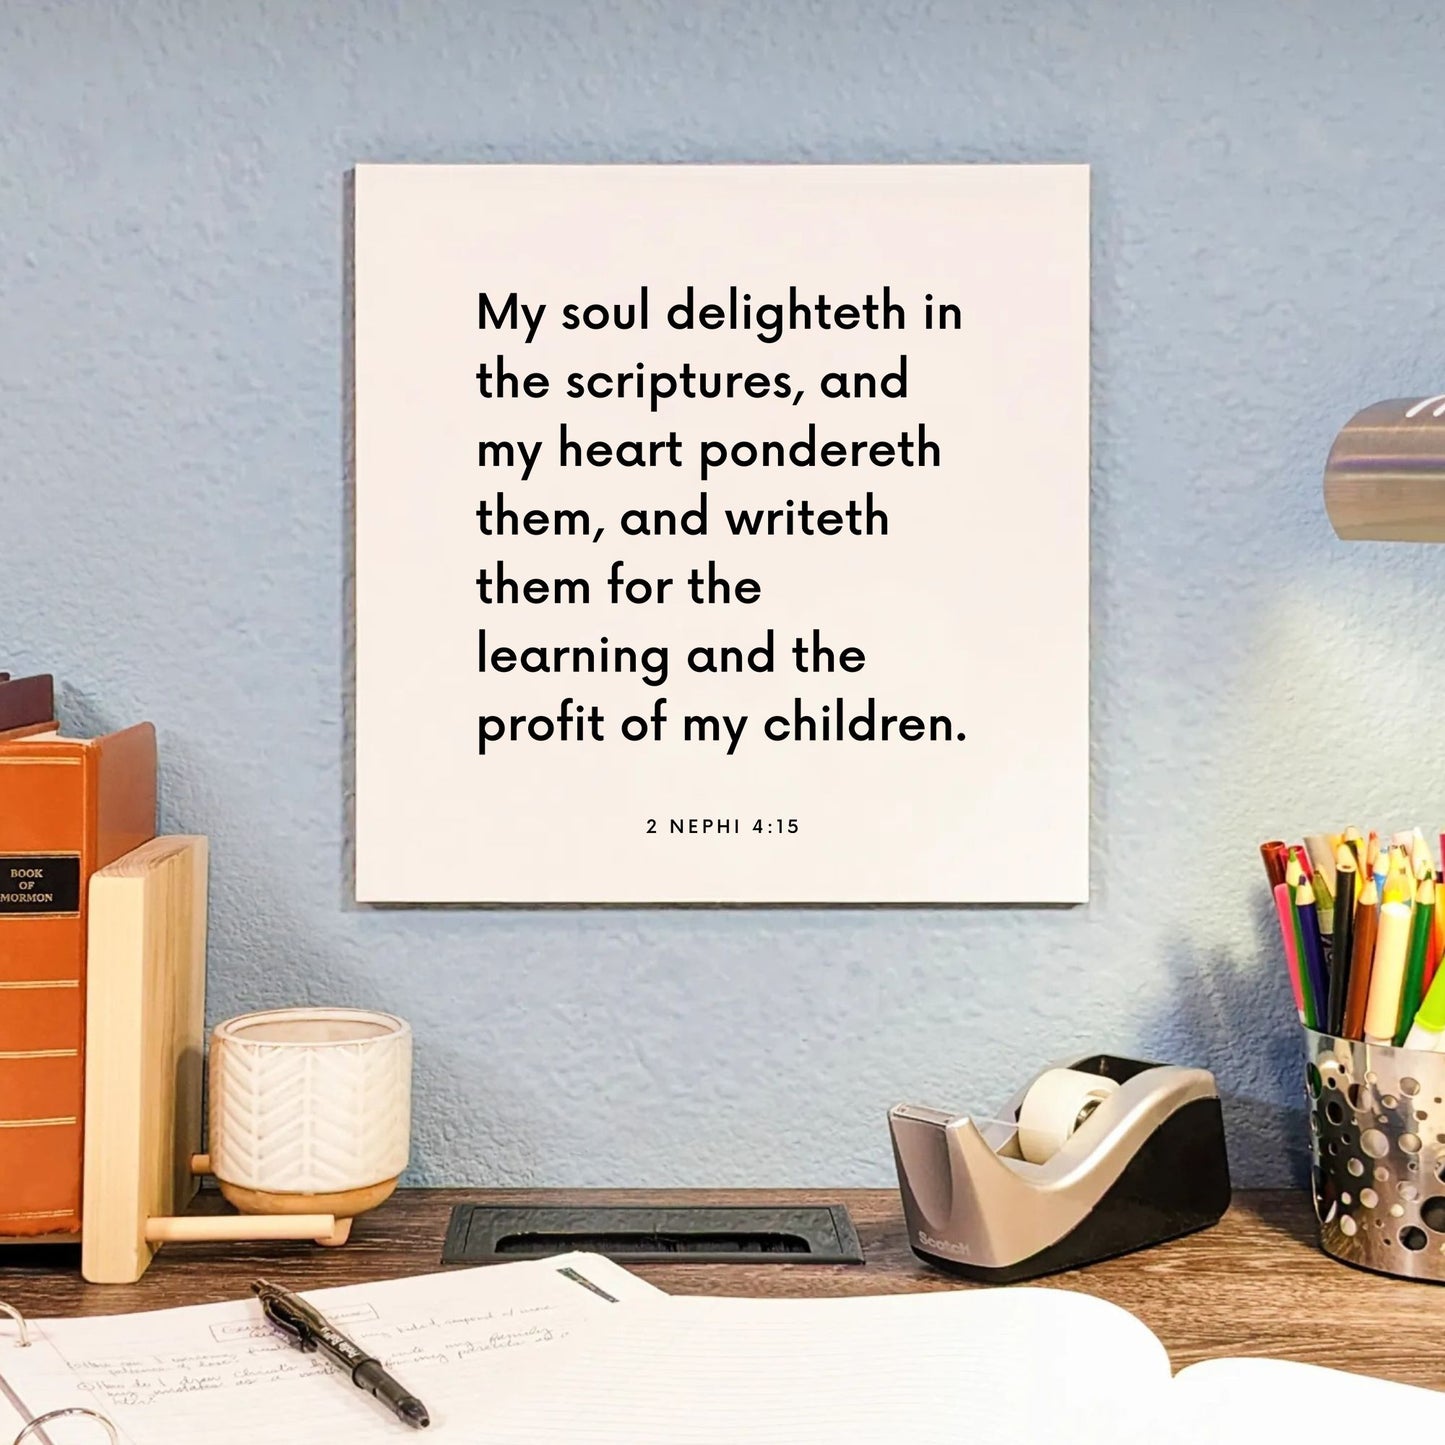 Desk mouting of the scripture tile for 2 Nephi 4:15 - "My soul delighteth in the scriptures"